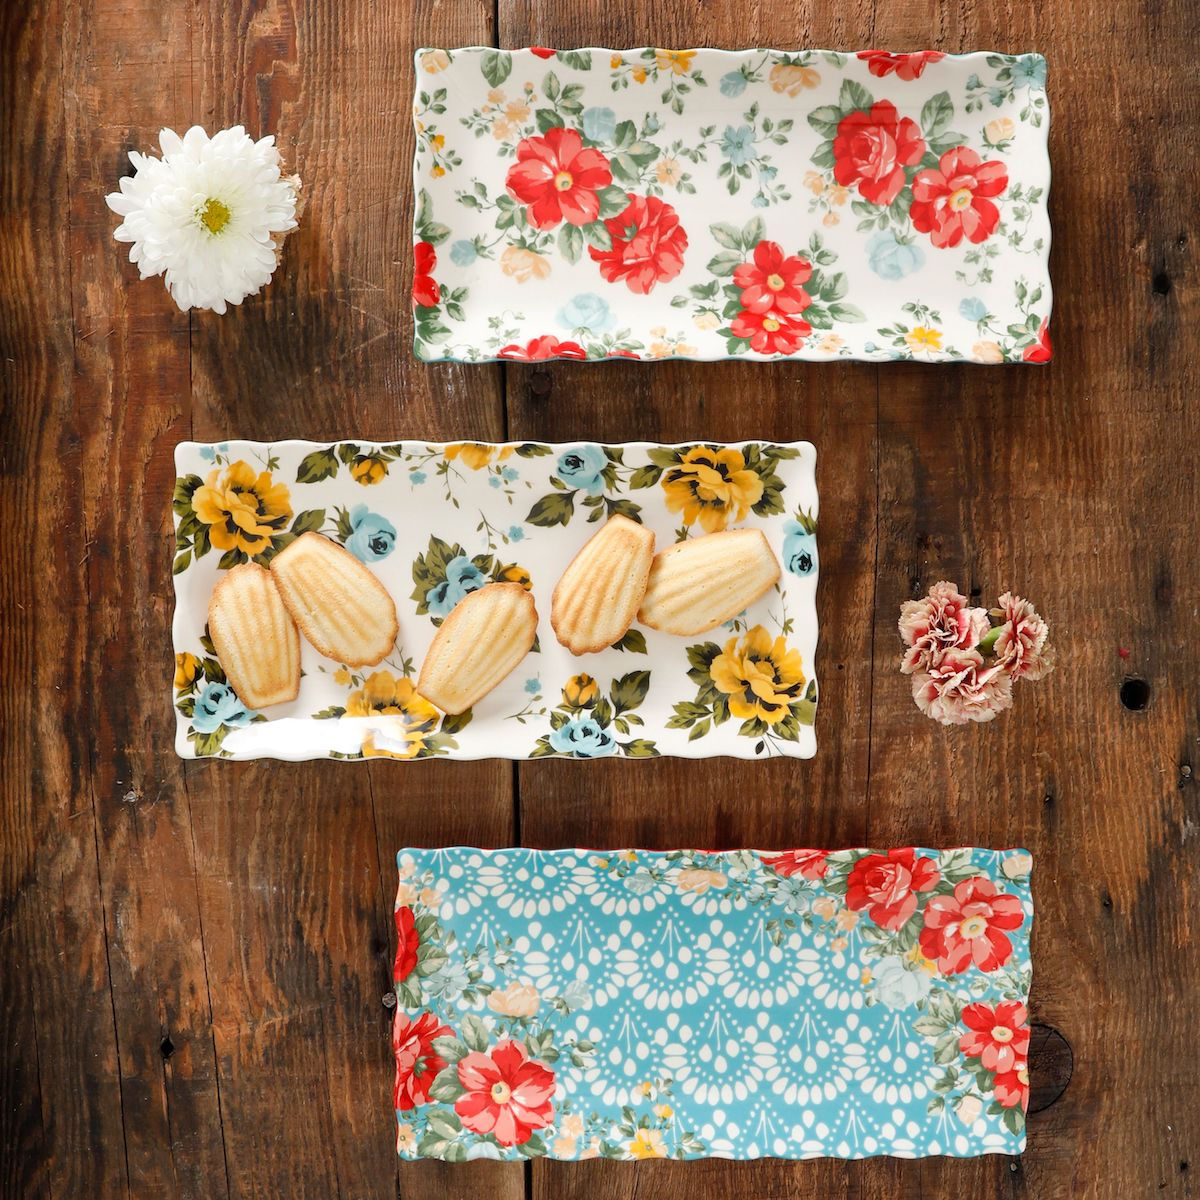 The Pioneer Woman Floral Medley 3-Piece Serving Platters